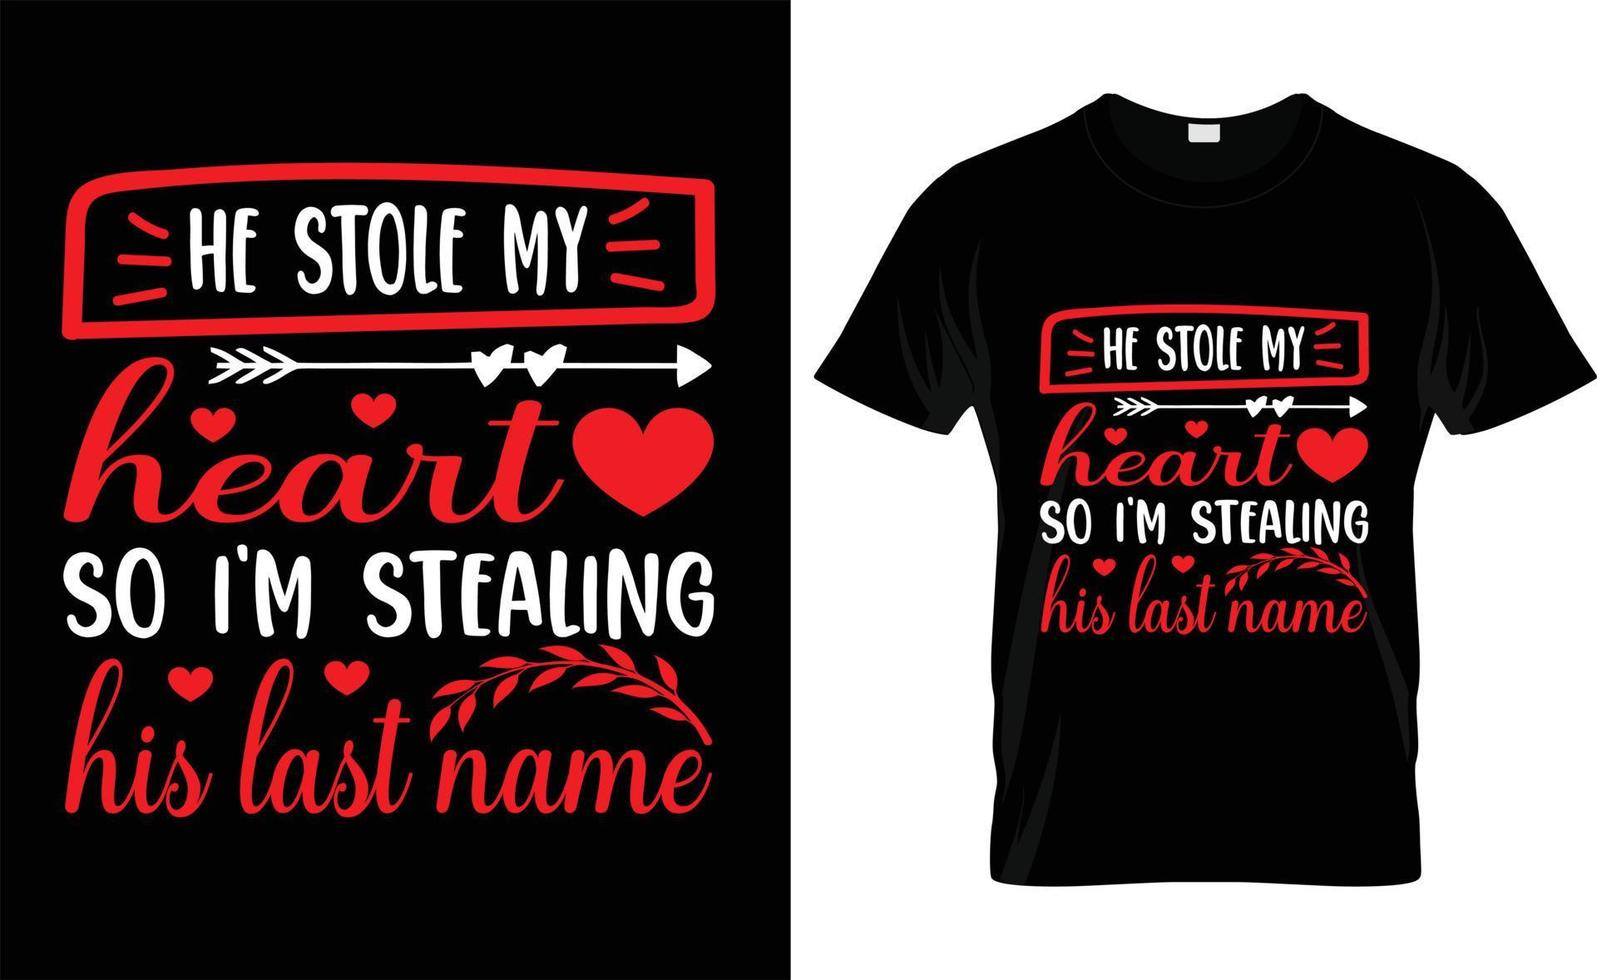 HE STOLE MY HEART SO I'M STEALING HIS LAST NAME,iove, ypography, VALENTINE'S DAY T SHIRT DESIGN vector